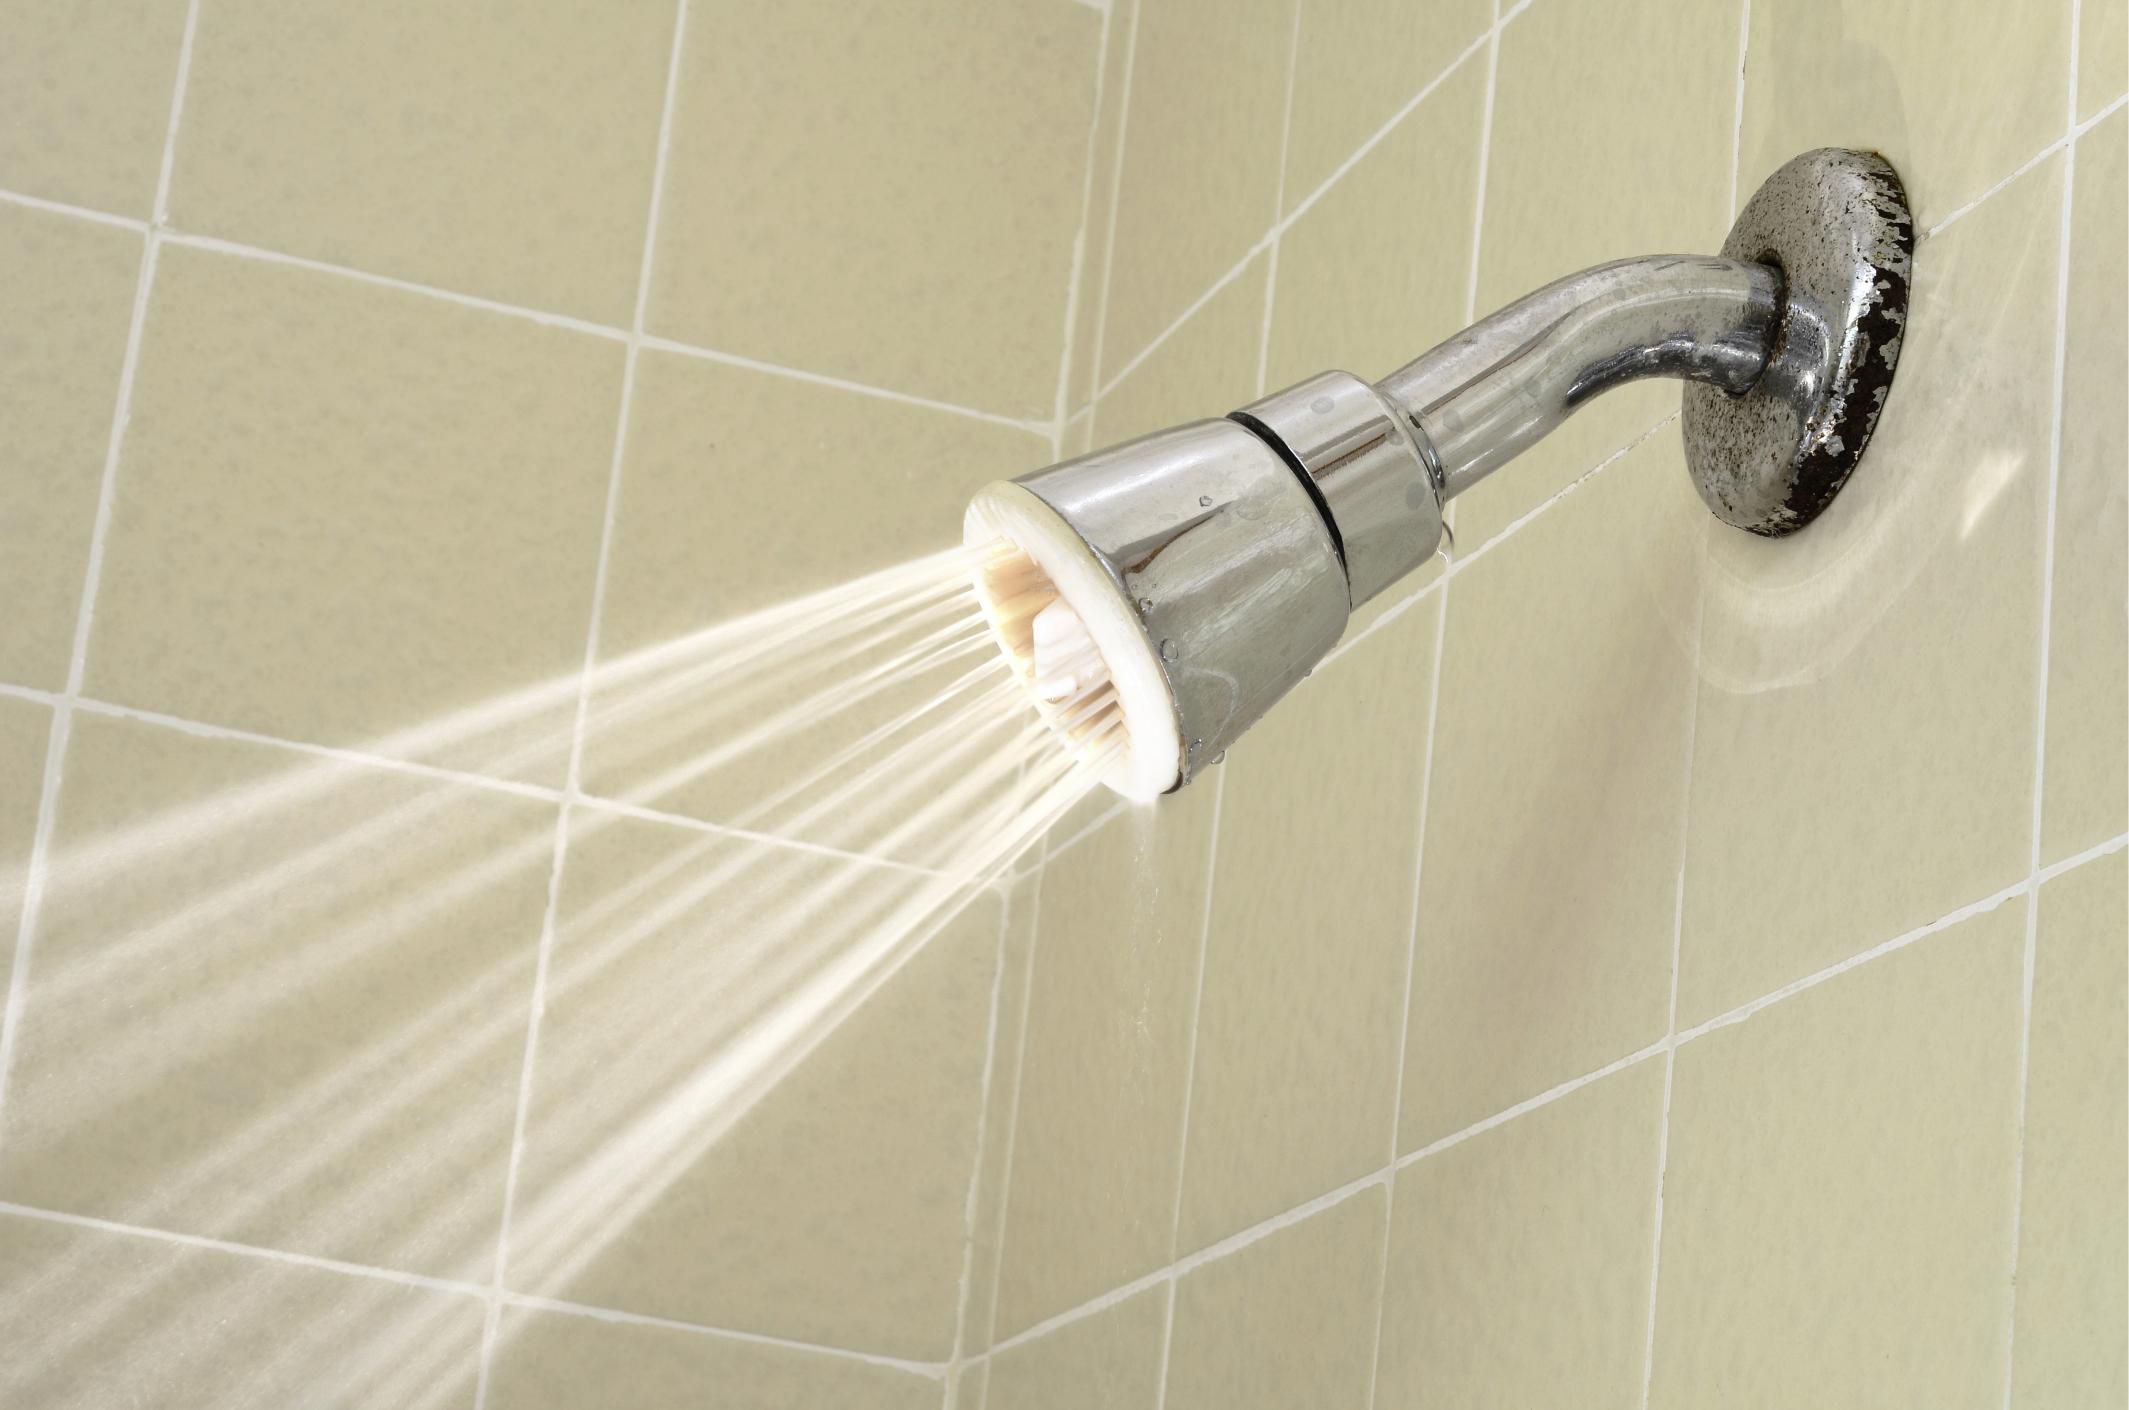 replacing-a-wall-mounted-showerhead